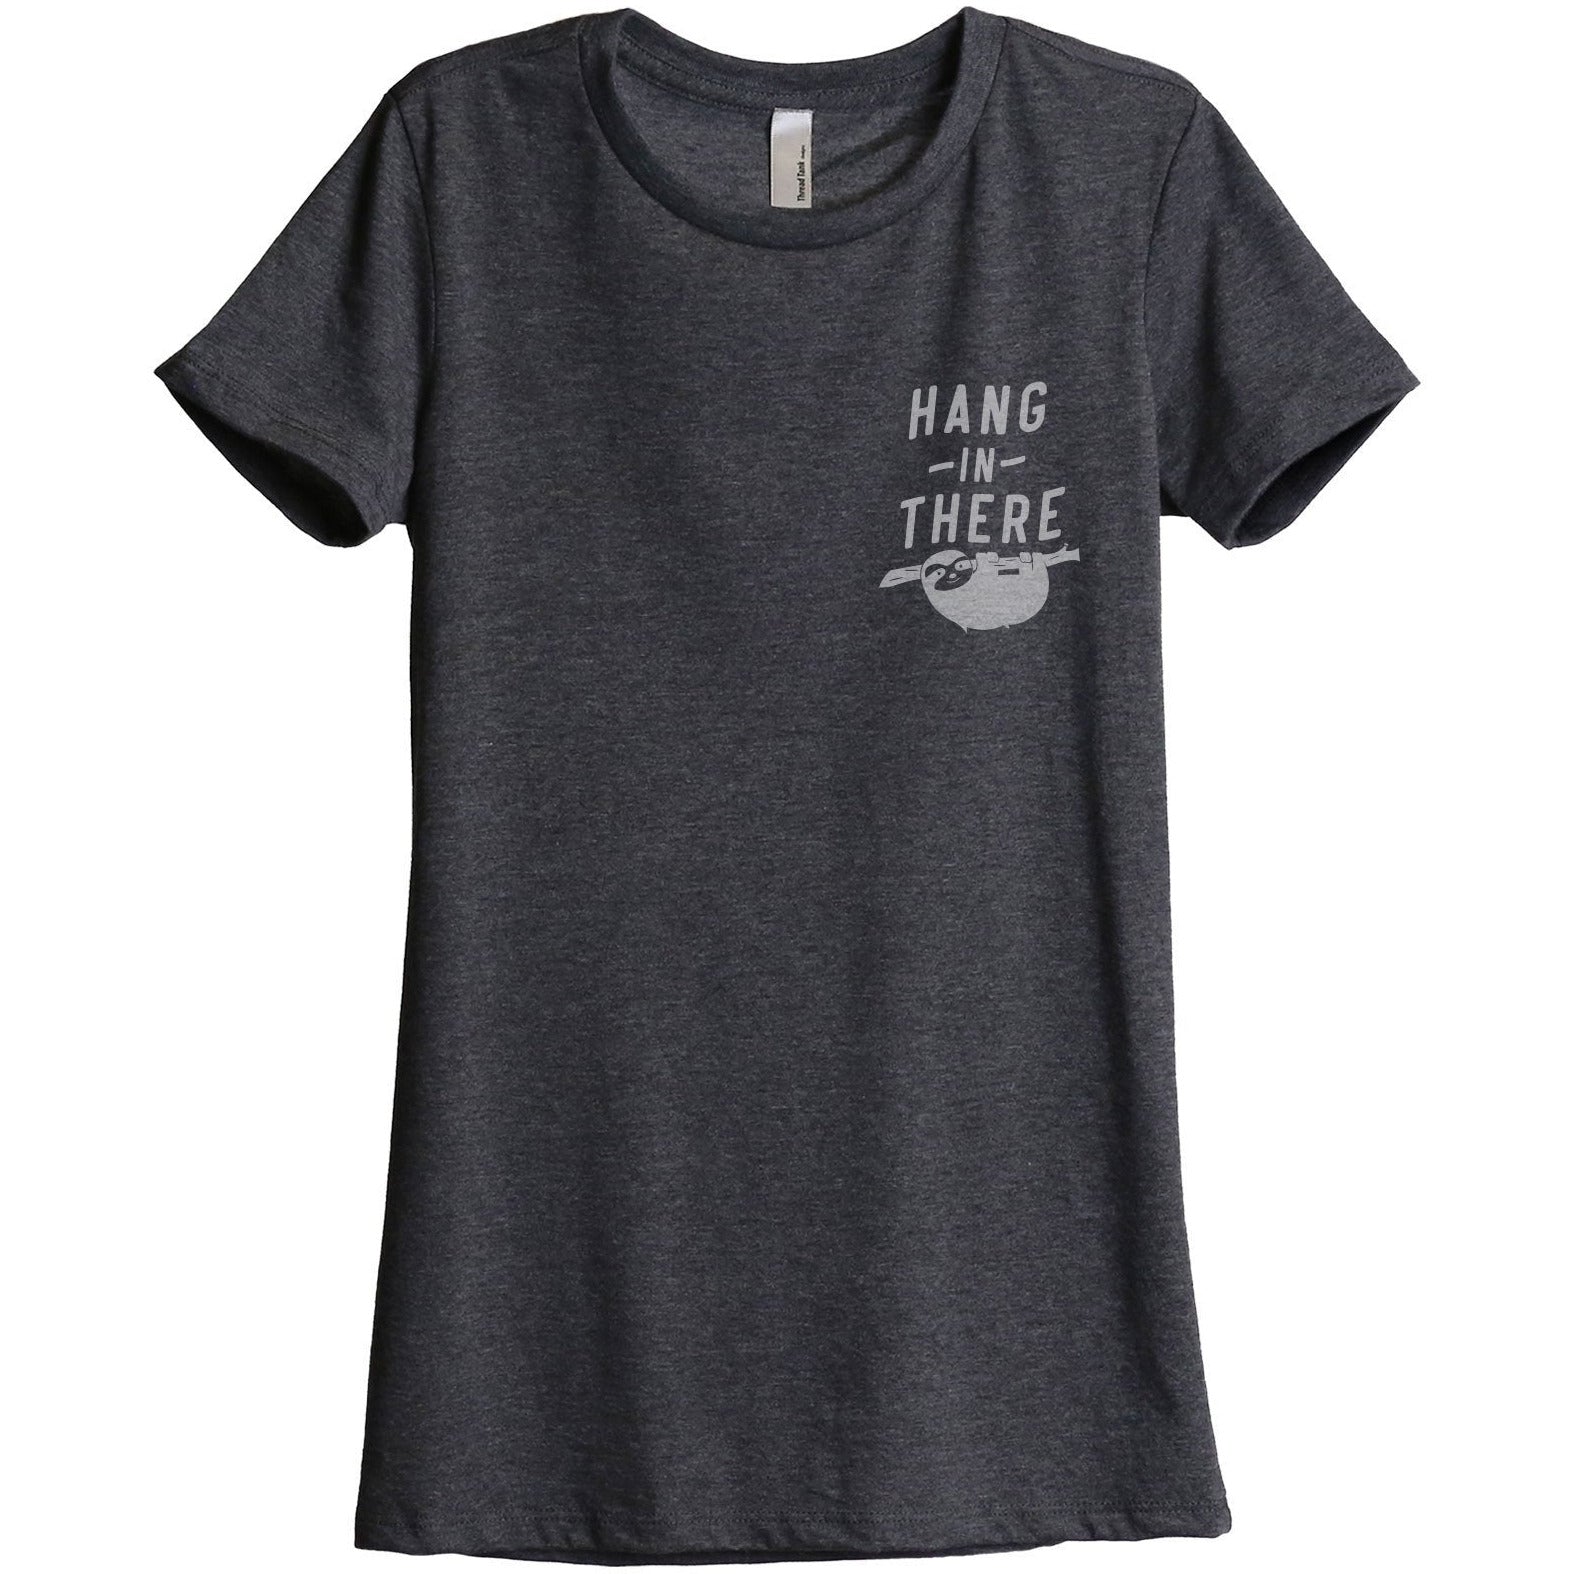 Hang In There Women's Relaxed Crewneck T-Shirt Top Tee Charcoal Grey
